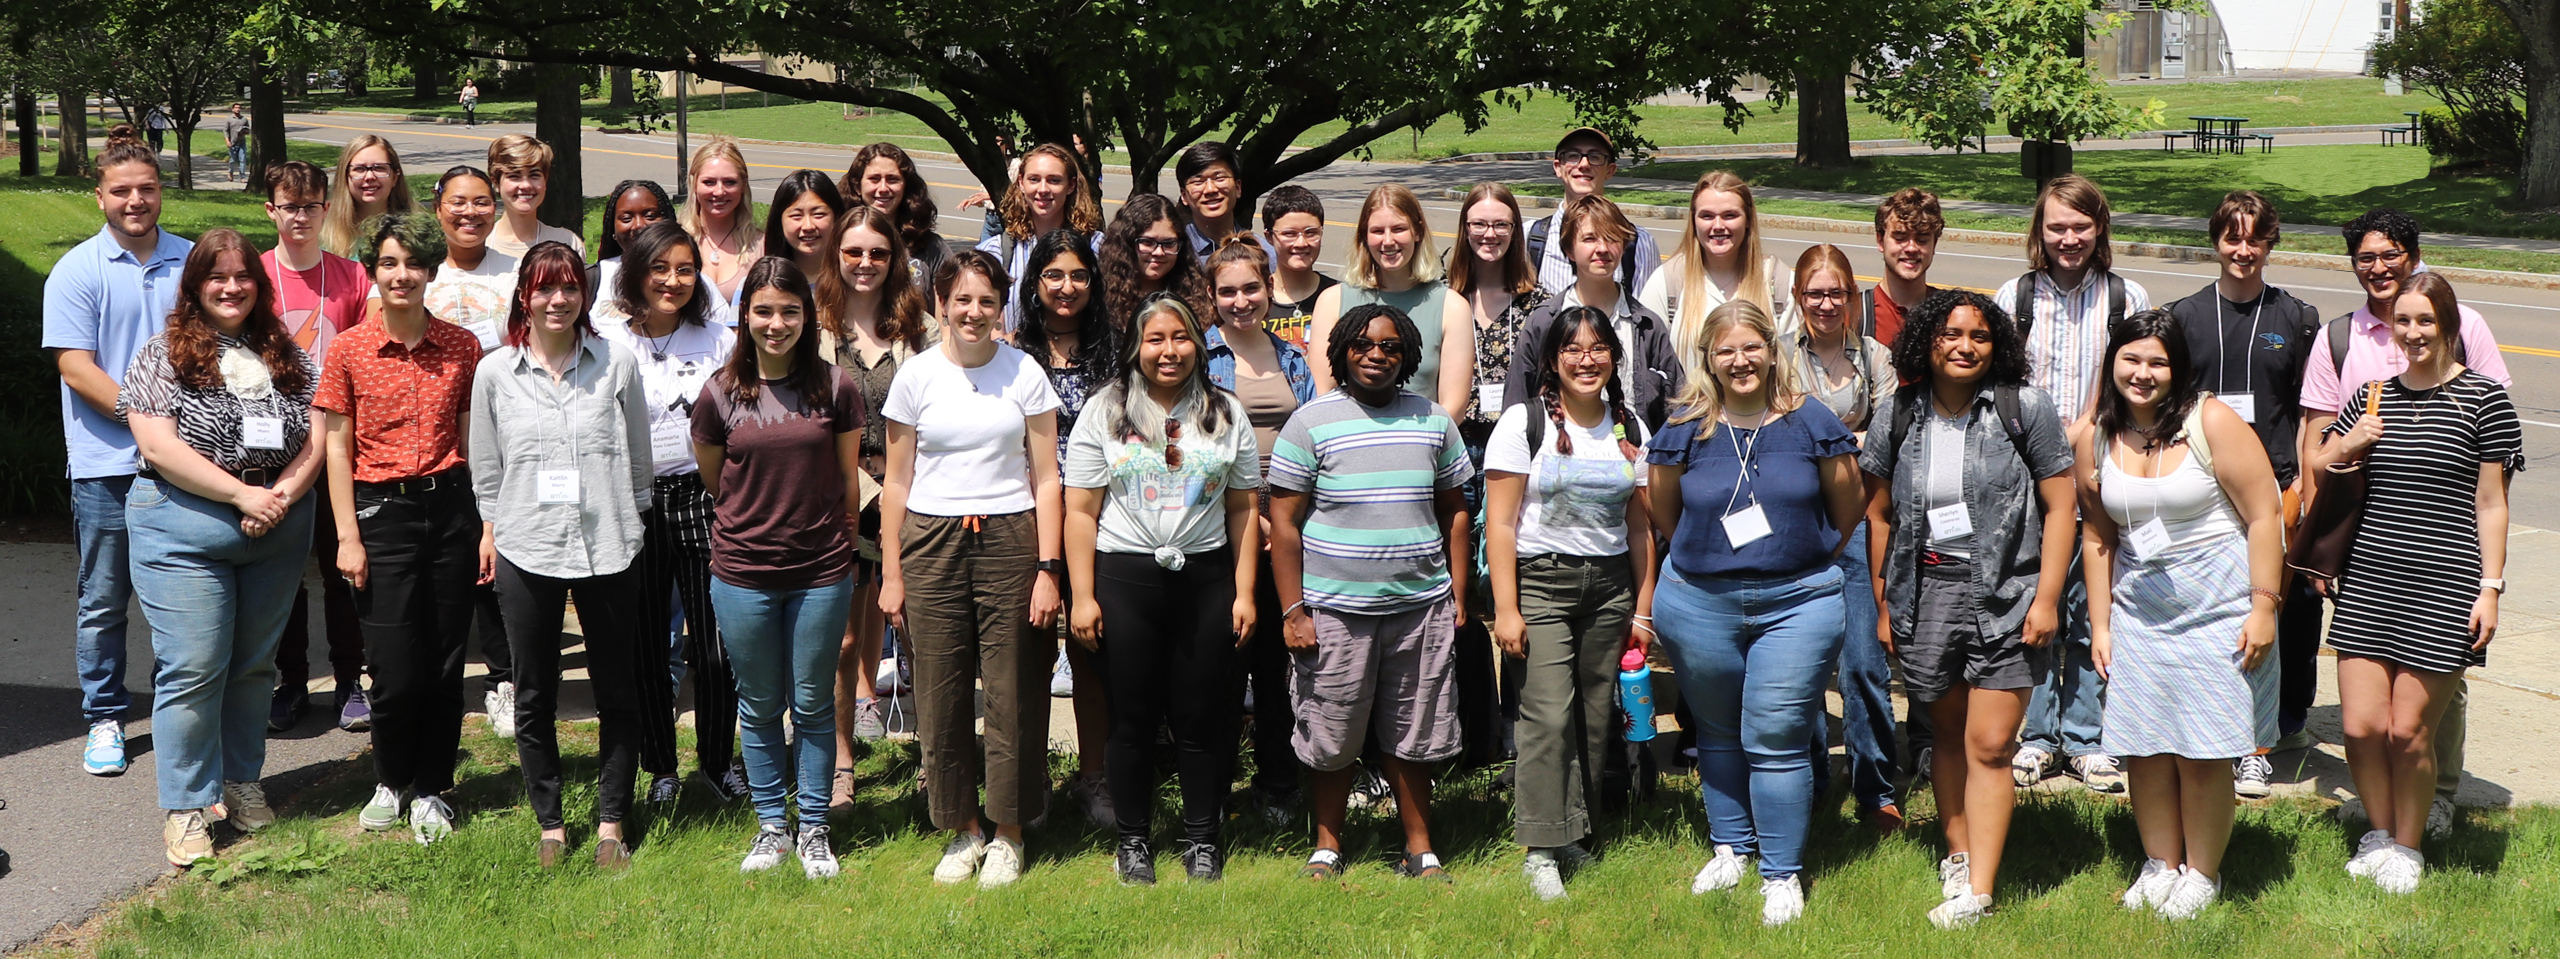 A group photo of 41 undergraduate interns during orientation outside of BTI, with a tree in the background.